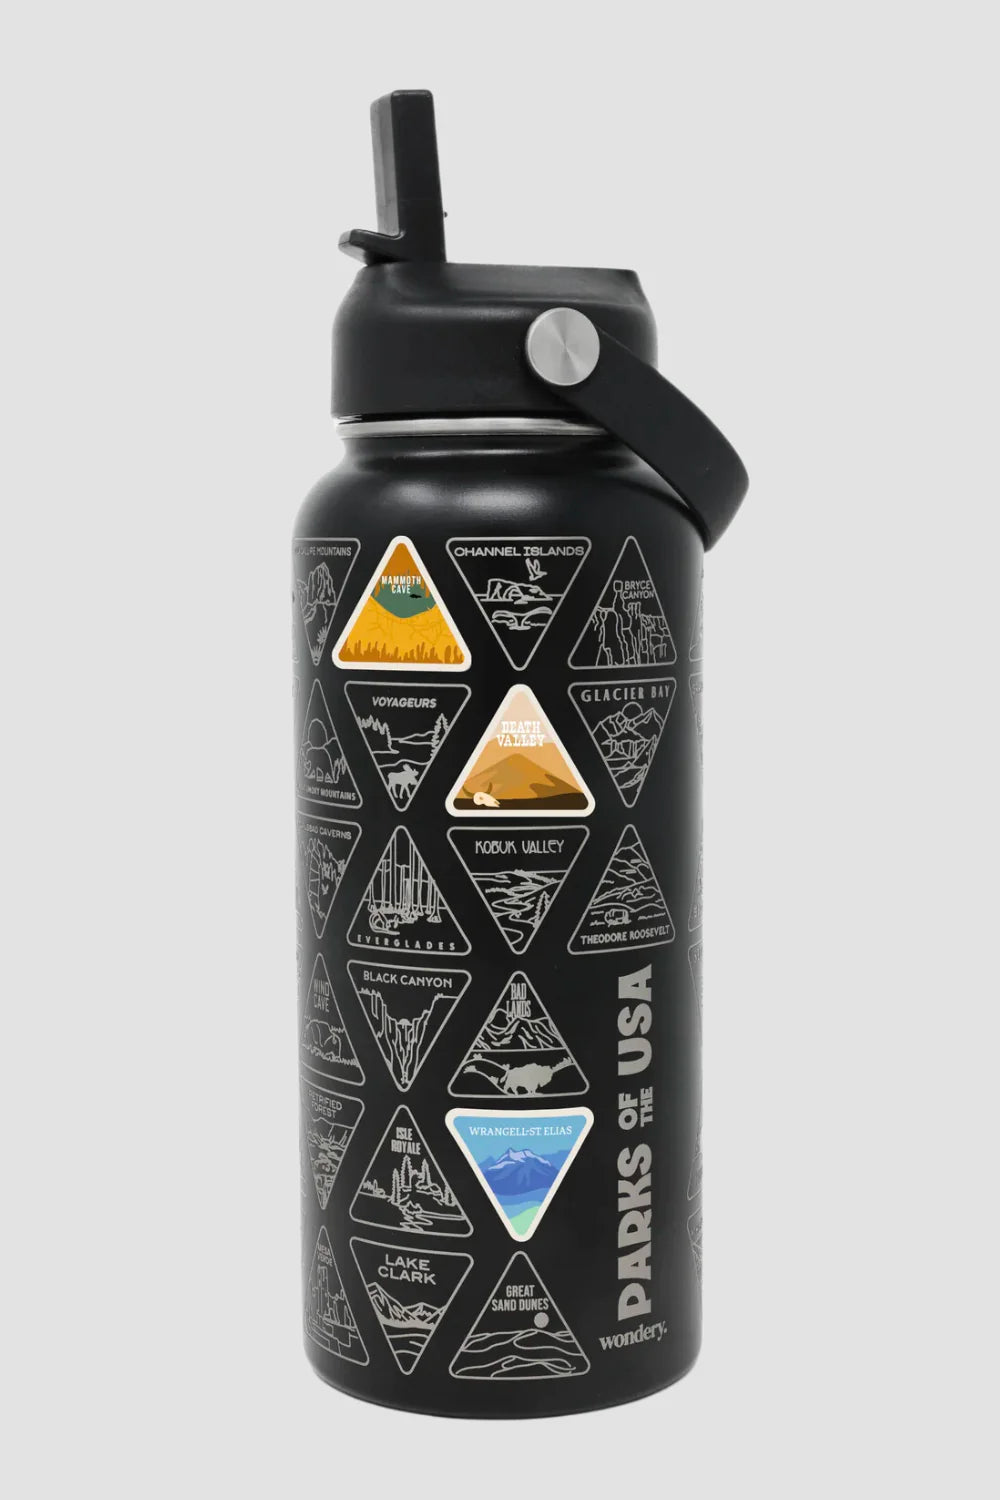 National Parks Tracker Water Bottle With Stickers, US Parks Gift